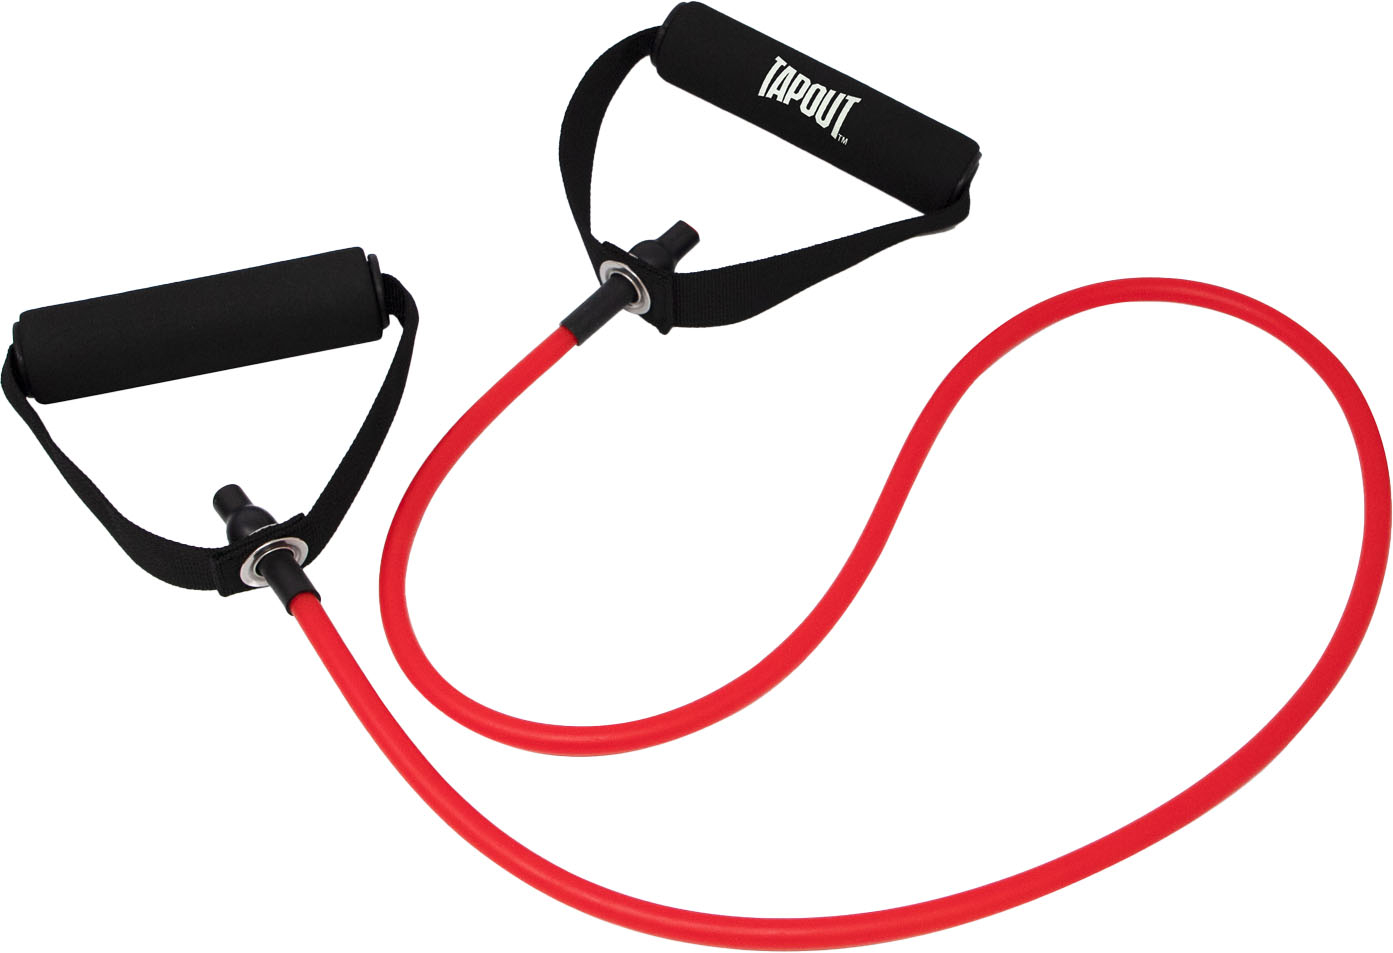 Angle View: Red 3pk Resistance Toning Set Tapout - Red